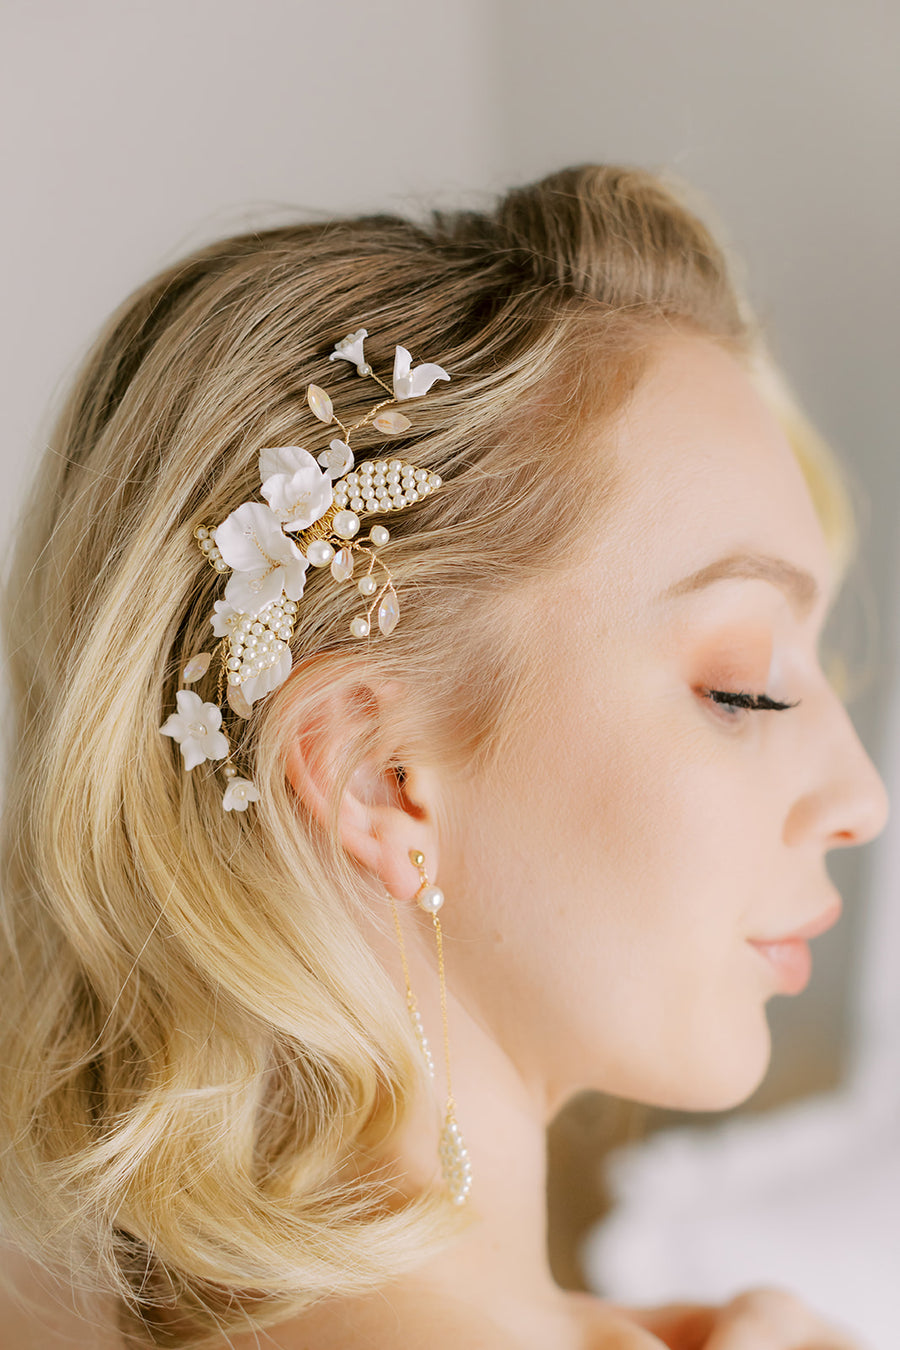 Monique Pearl and 14kt Goldfill Bridal Earrings